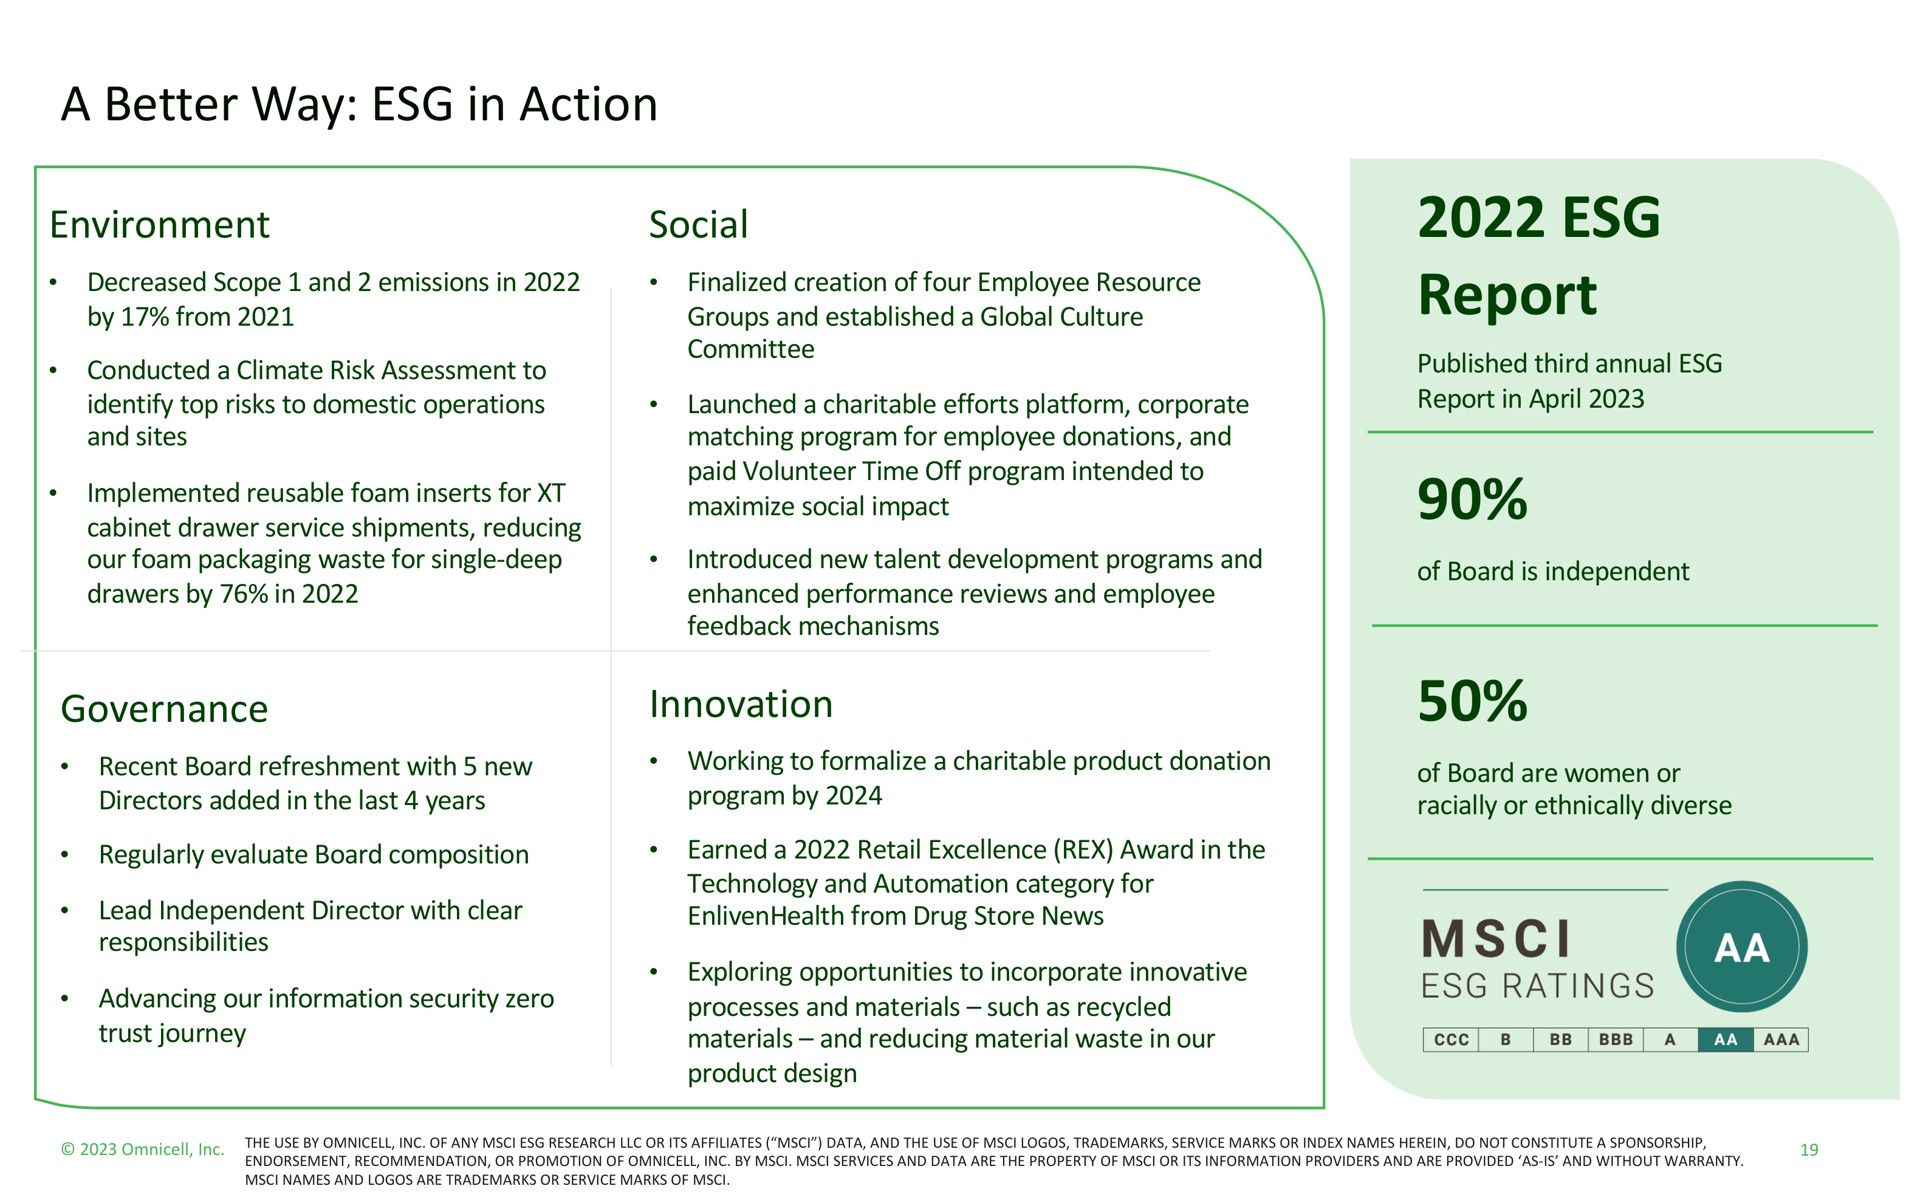 a better way in action environment governance social innovation report ratings | Omnicell